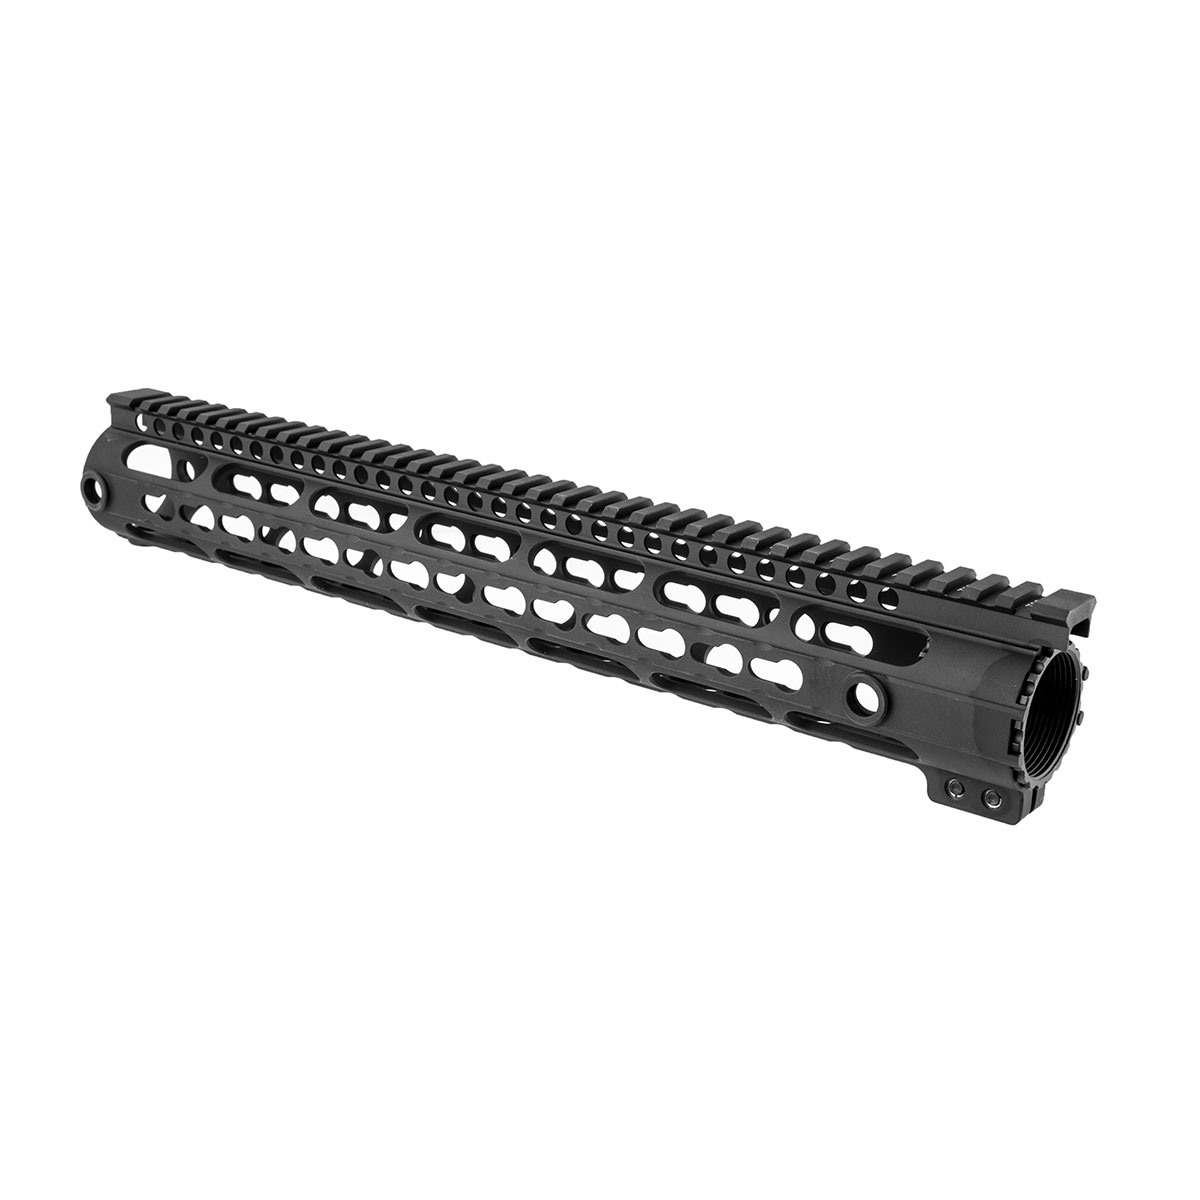 MIDWEST INDUSTRIES, INC. 308 SS HANDGUARDS, KEYMOD, DPMS HIGH | Brownells